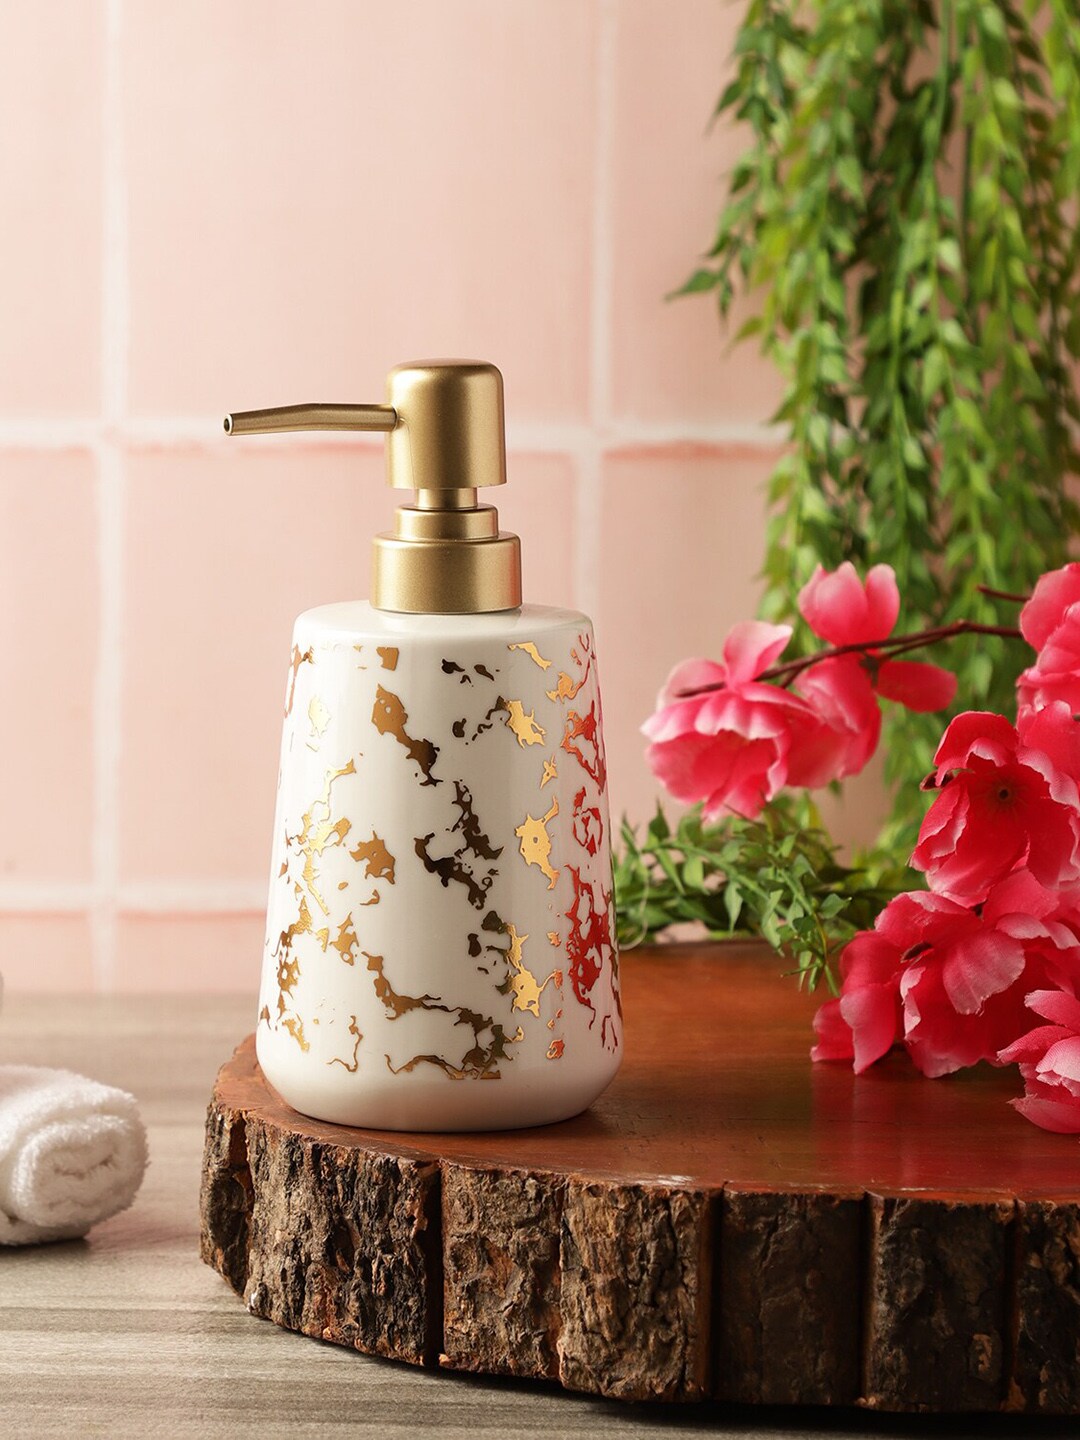 The Decor Mart White & Gold-Toned Patterned Ceramic Soap Dispenser Price in India